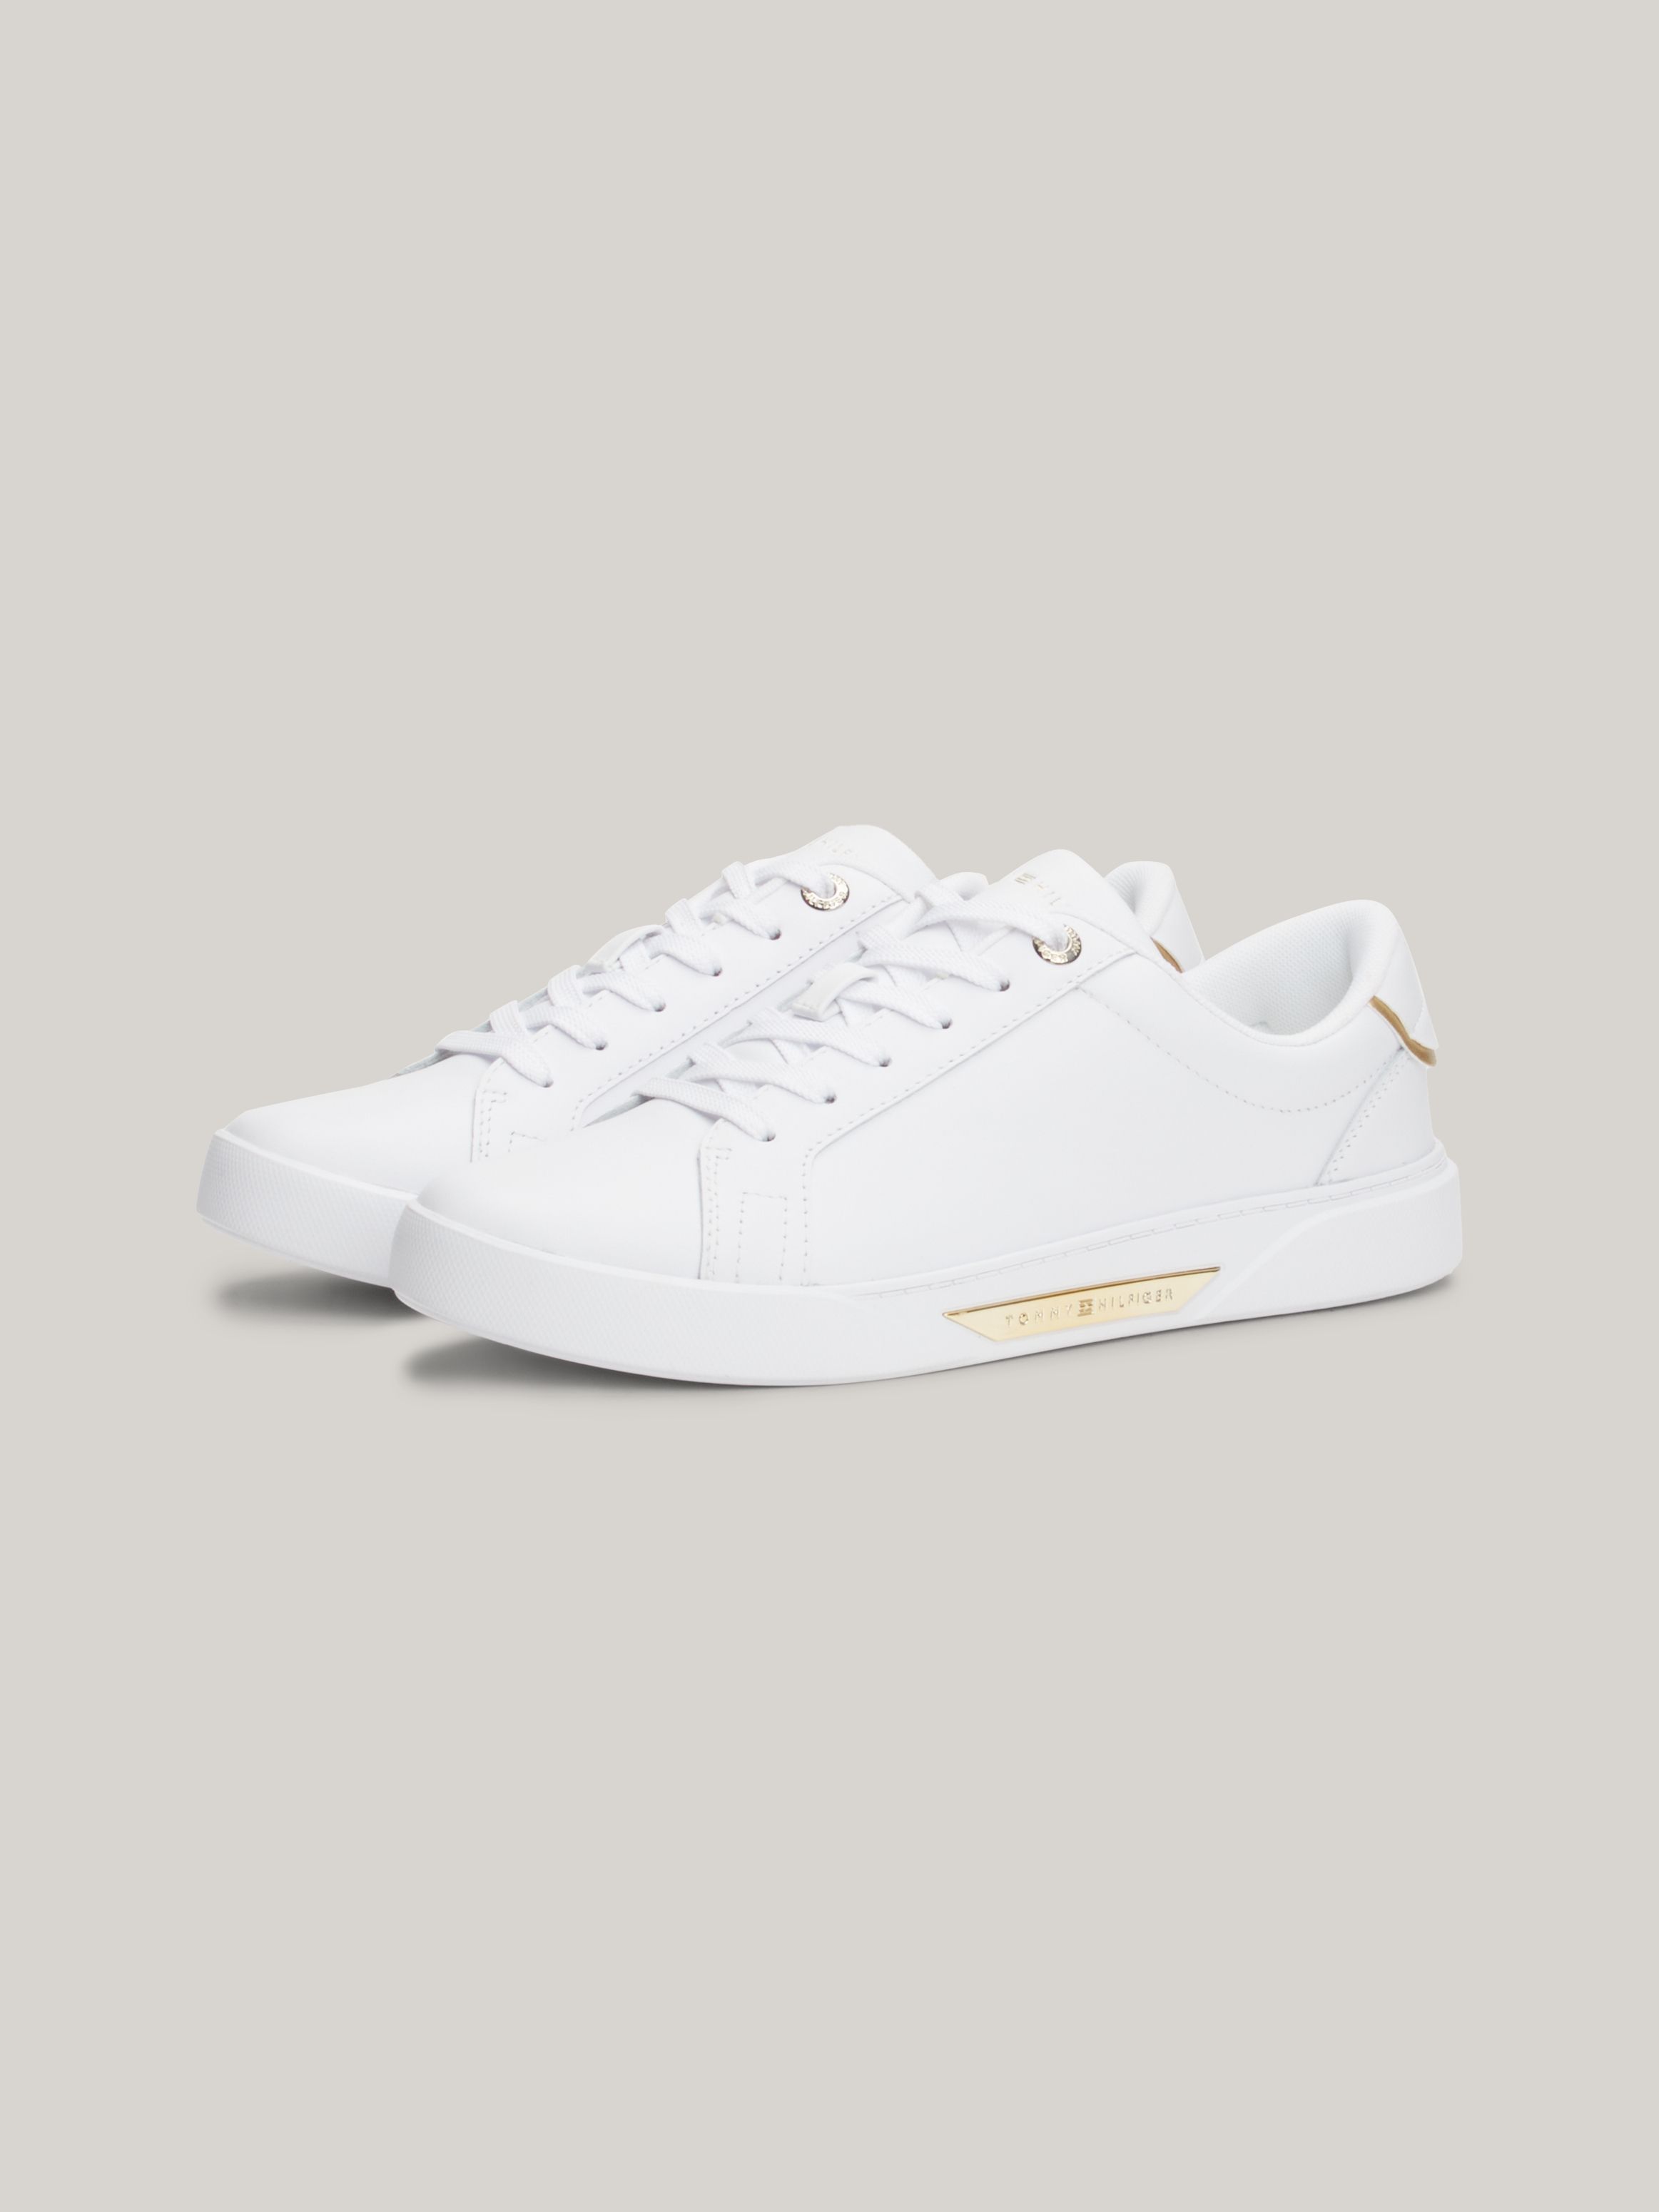 Tommy Hilfiger Women's Metallic Trim Leather Court Trainers